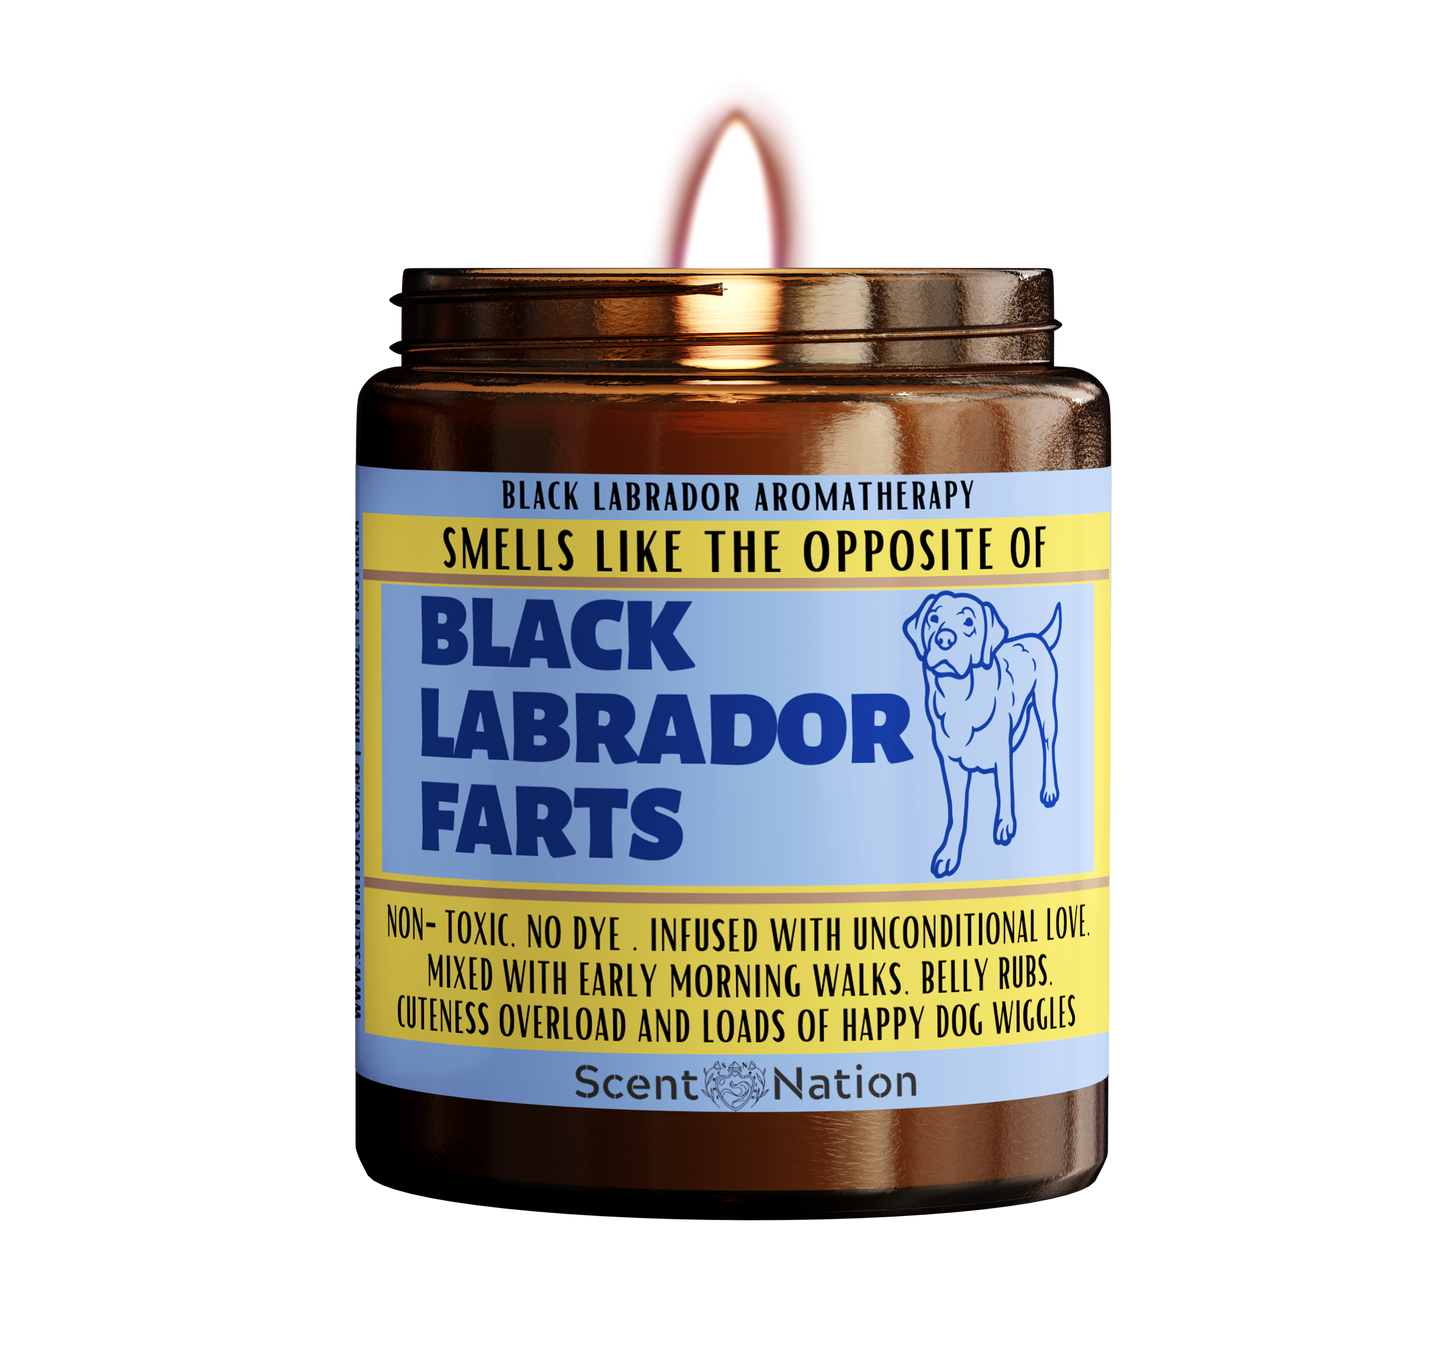 A Black labrador puppy on a candle labeled "Smells like the opposite of a black labrador fart". The candle is made in Australia and is a great gift for black labrador lovers, new black labrador owners, or anyone who appreciates a dog candle that doubles as a fart extinguisher..